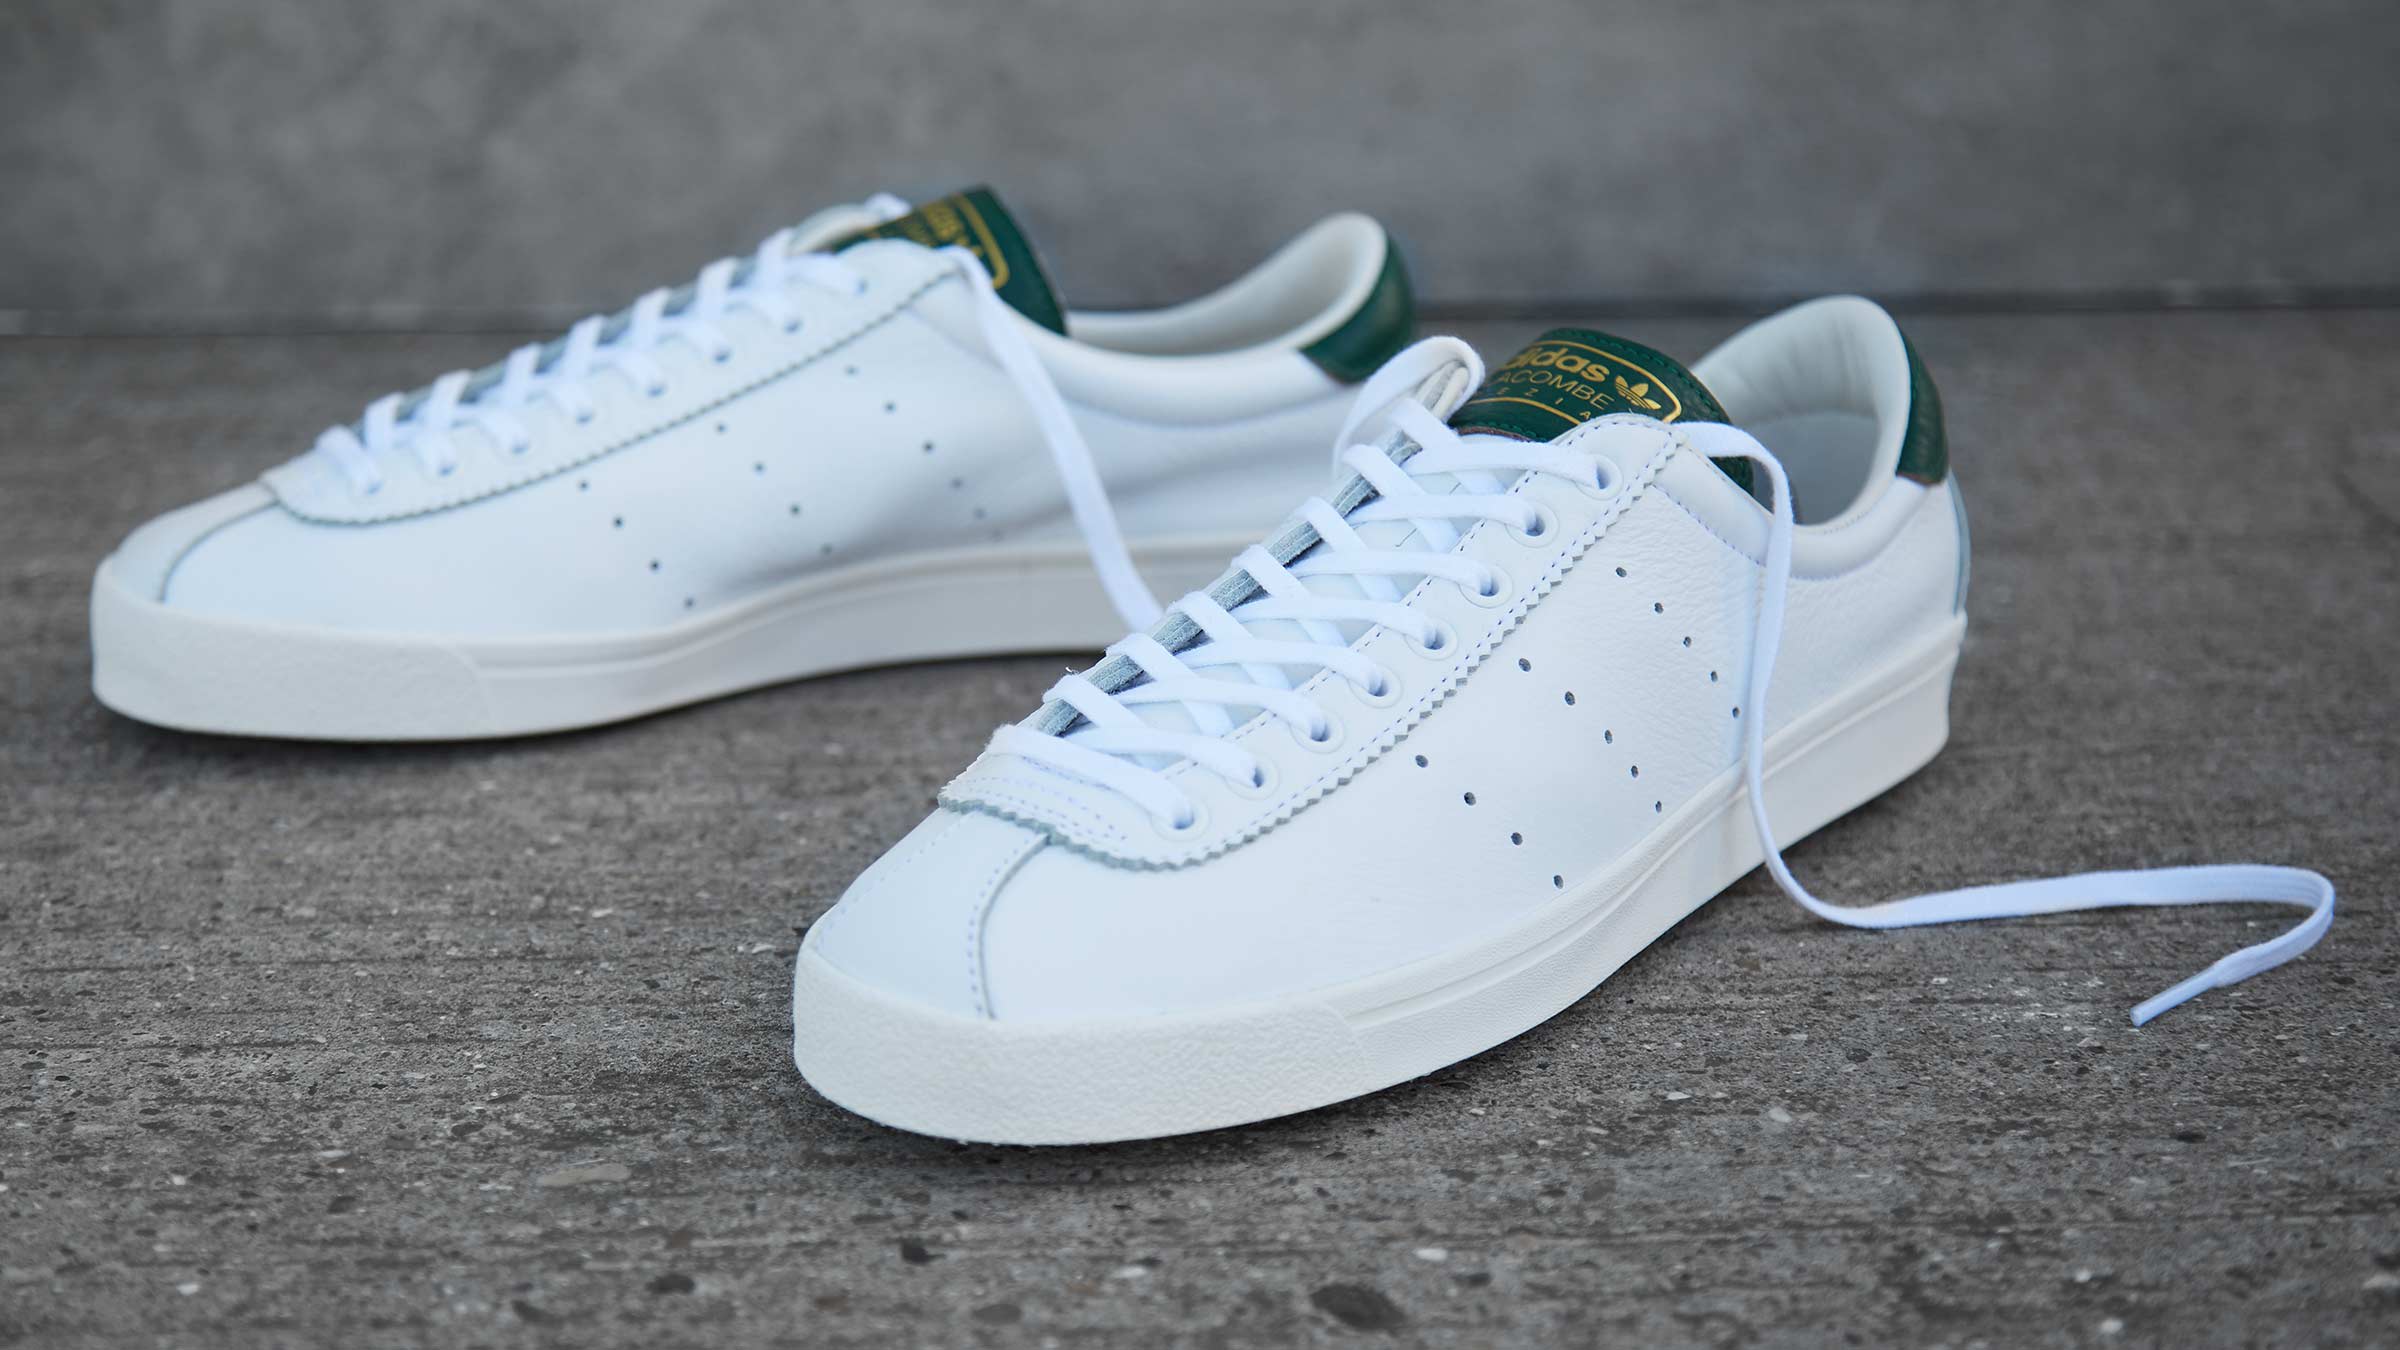 Adidas SPZL Lacombe (Core White & Easy Green) | END. Launches